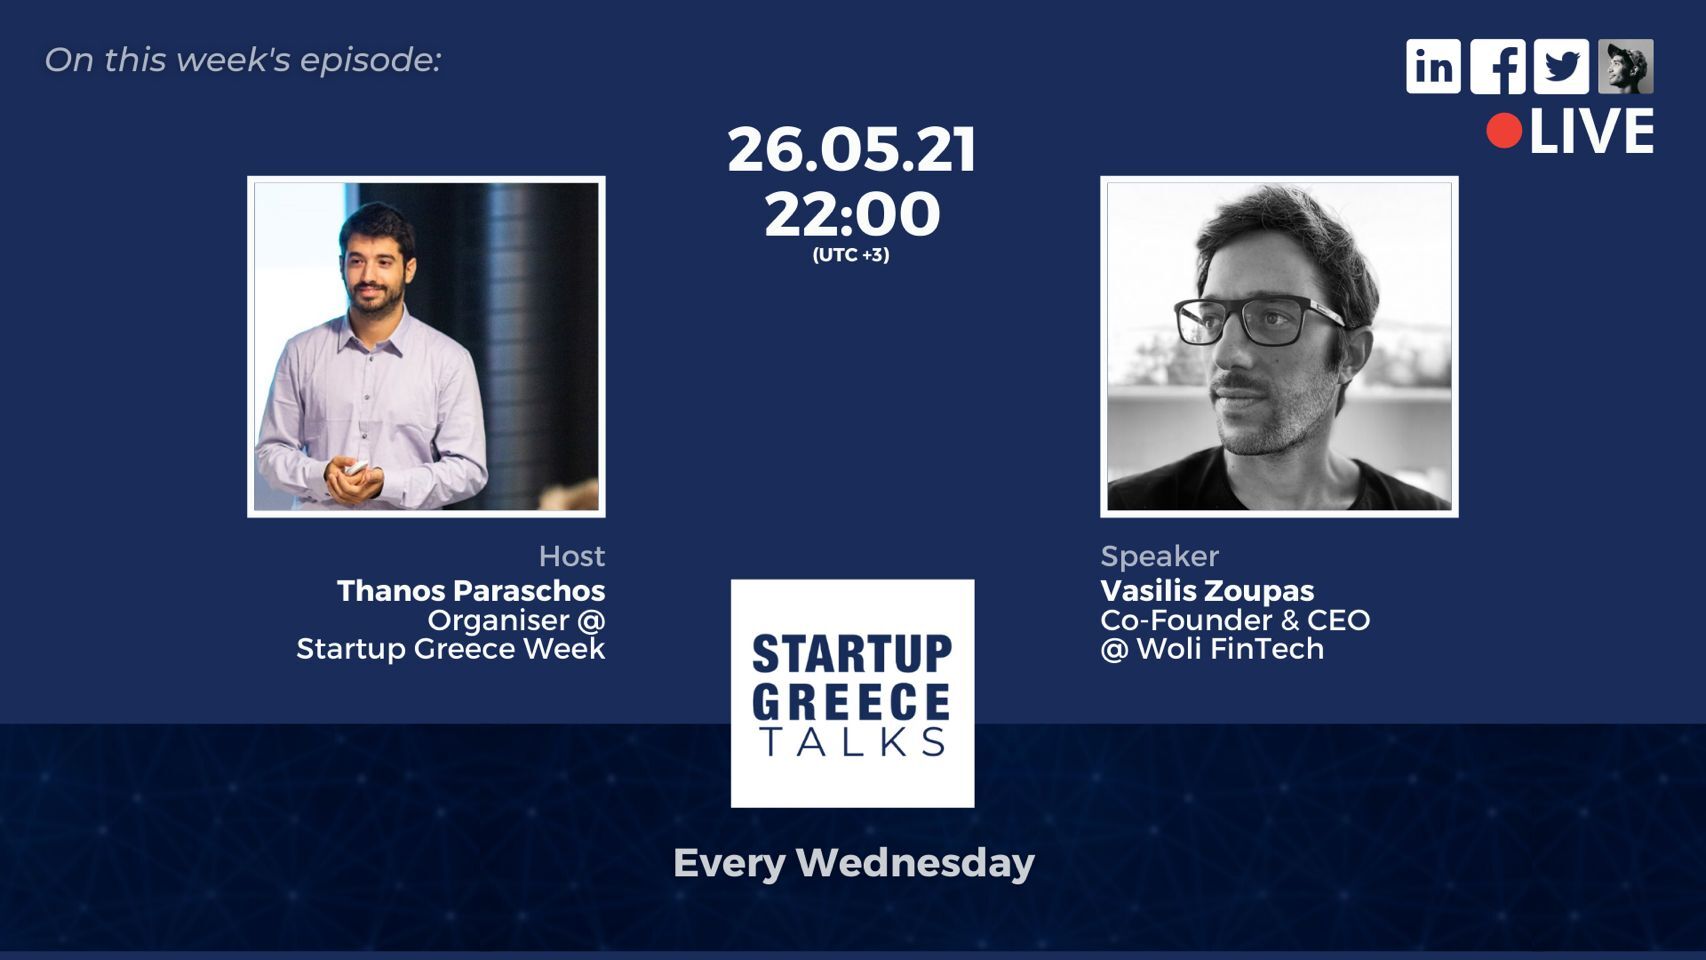 “Startup Greece talks with…Woli”